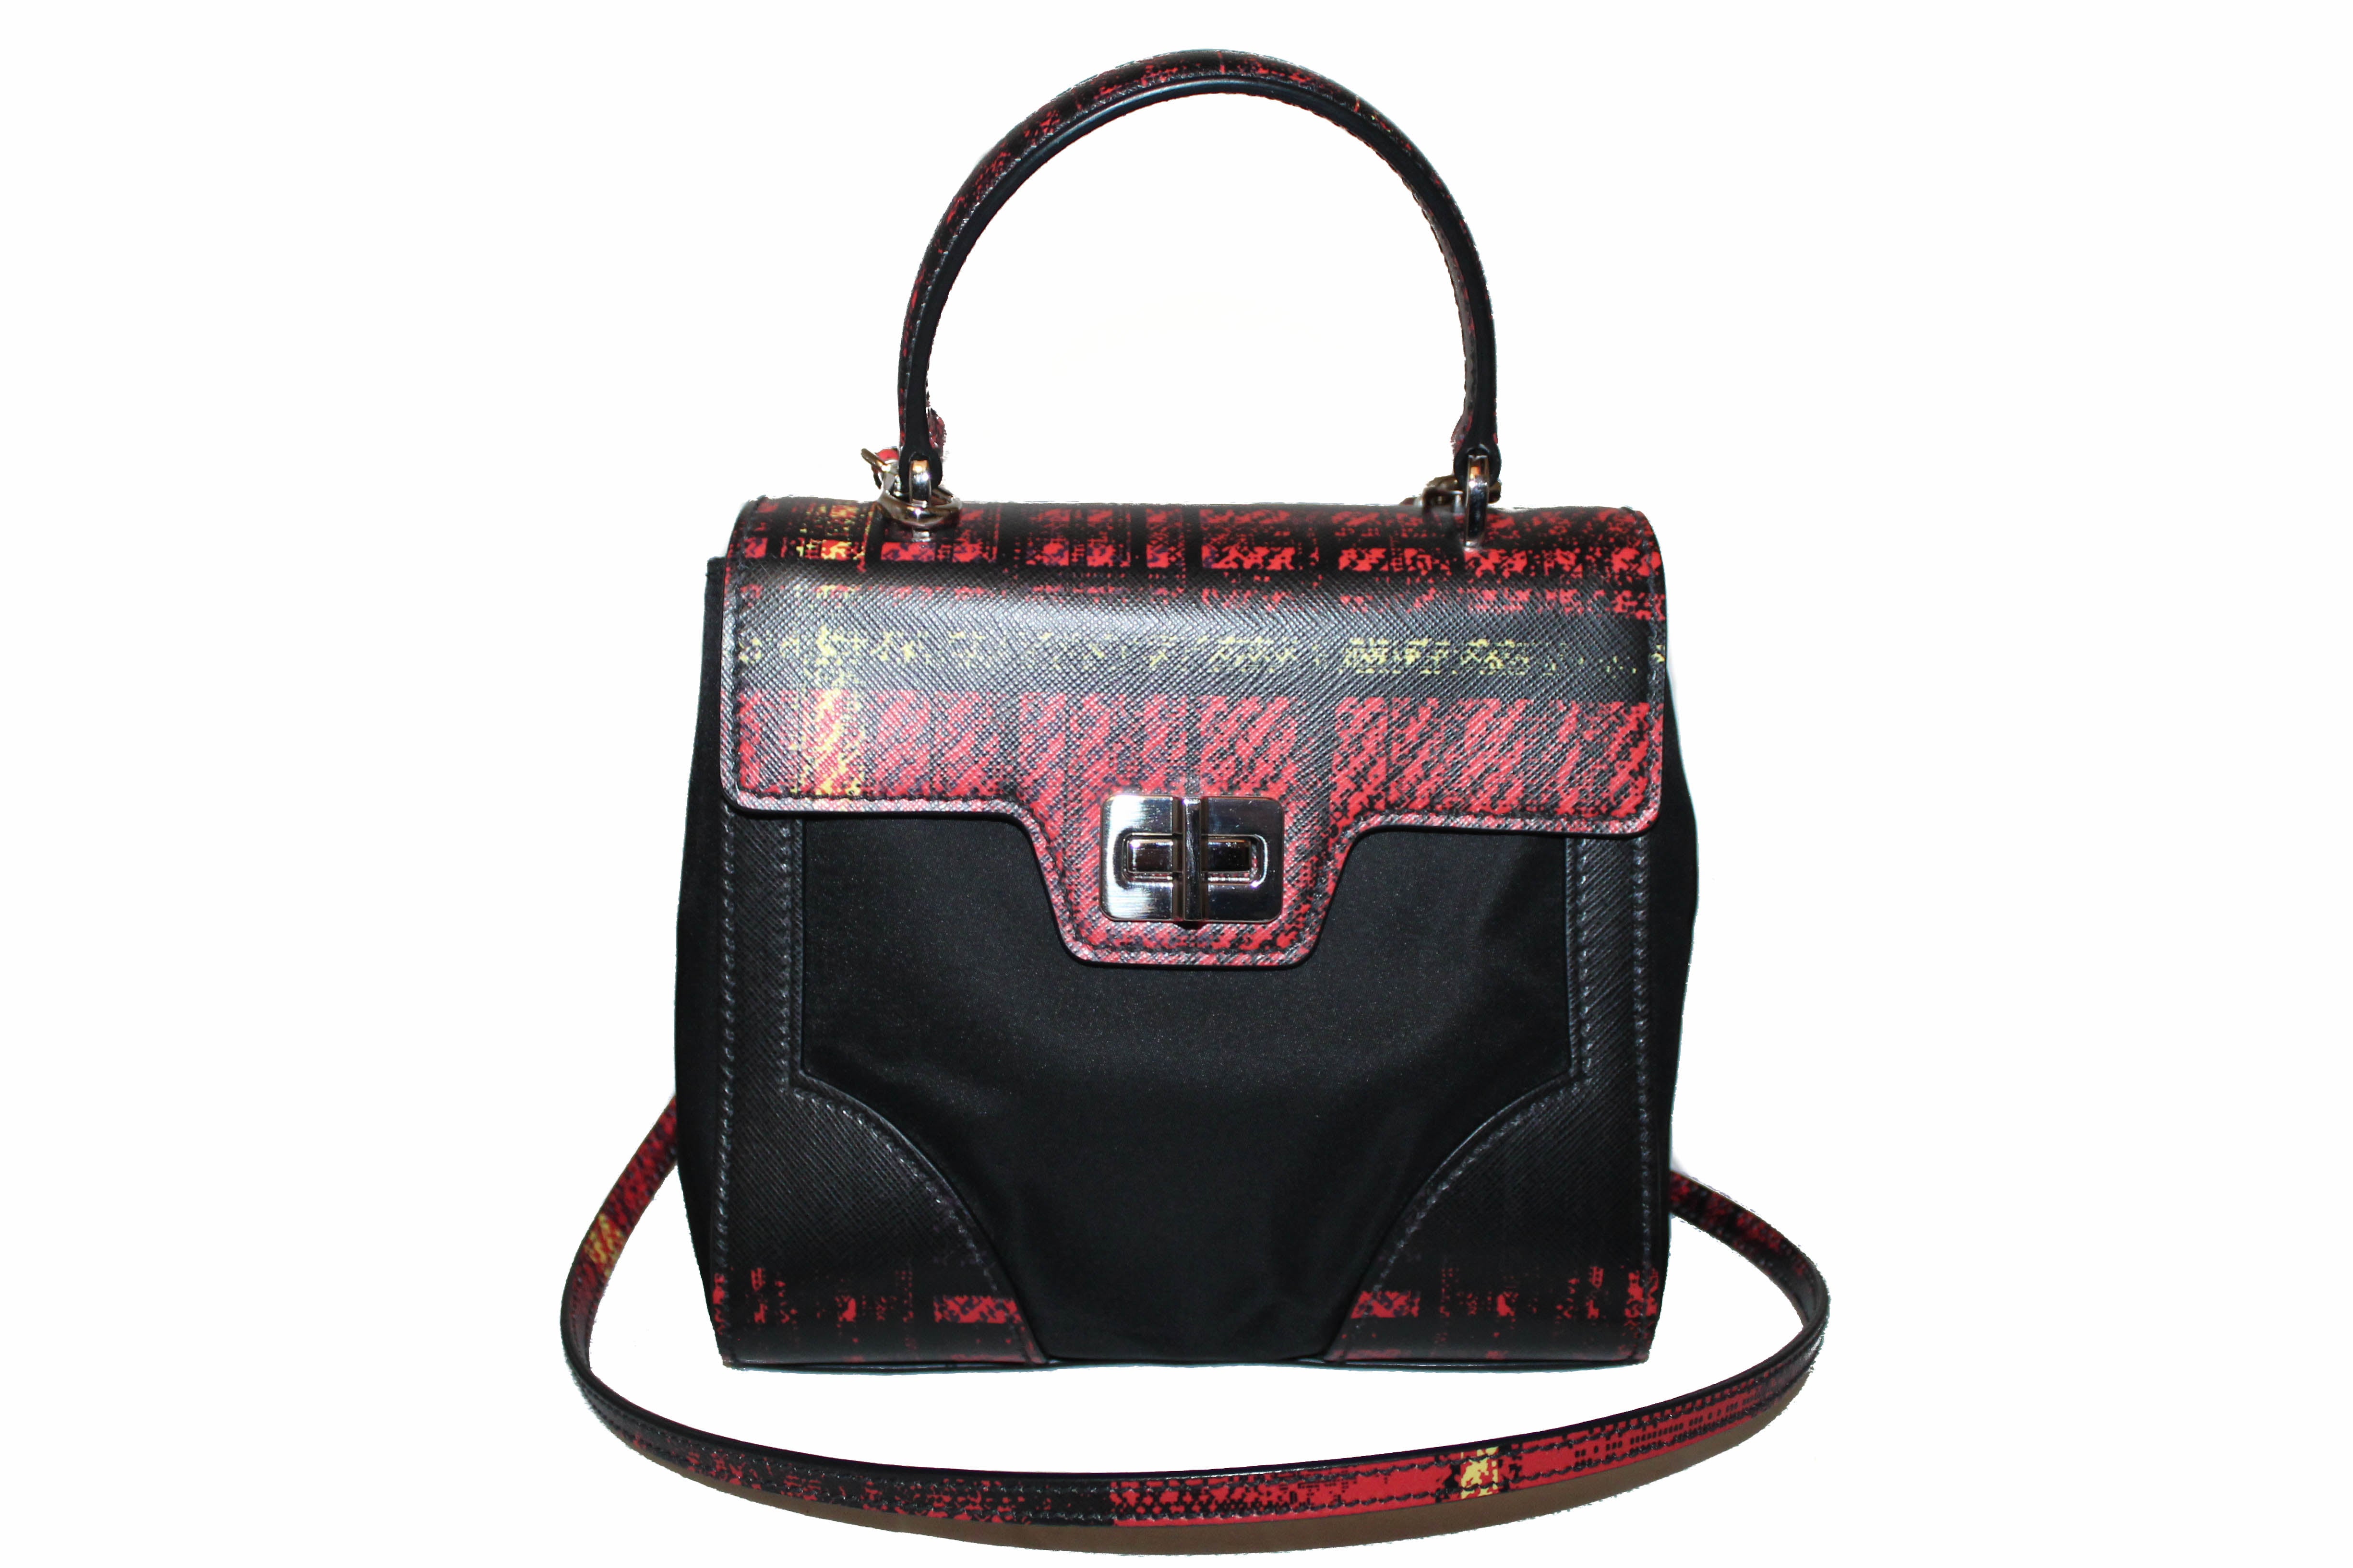 Authentic New Prada Red Plaid Tartan Saffiano Leather and Nylon Top Handle Messenger Bag with Long Strap